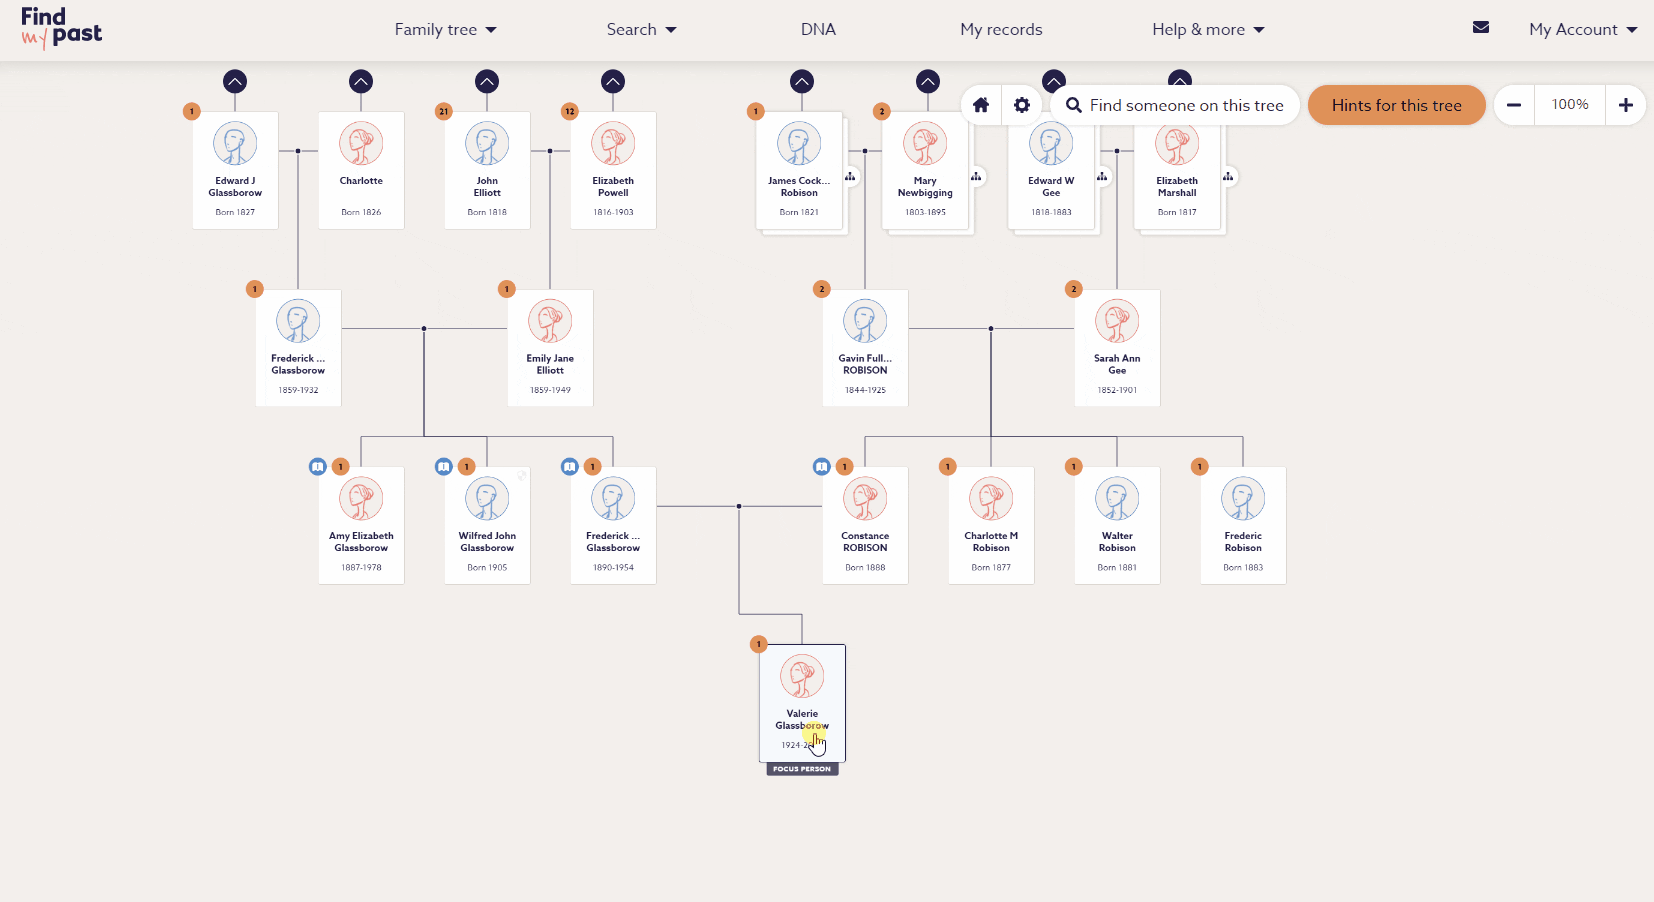 How to view your tree in pedigree format